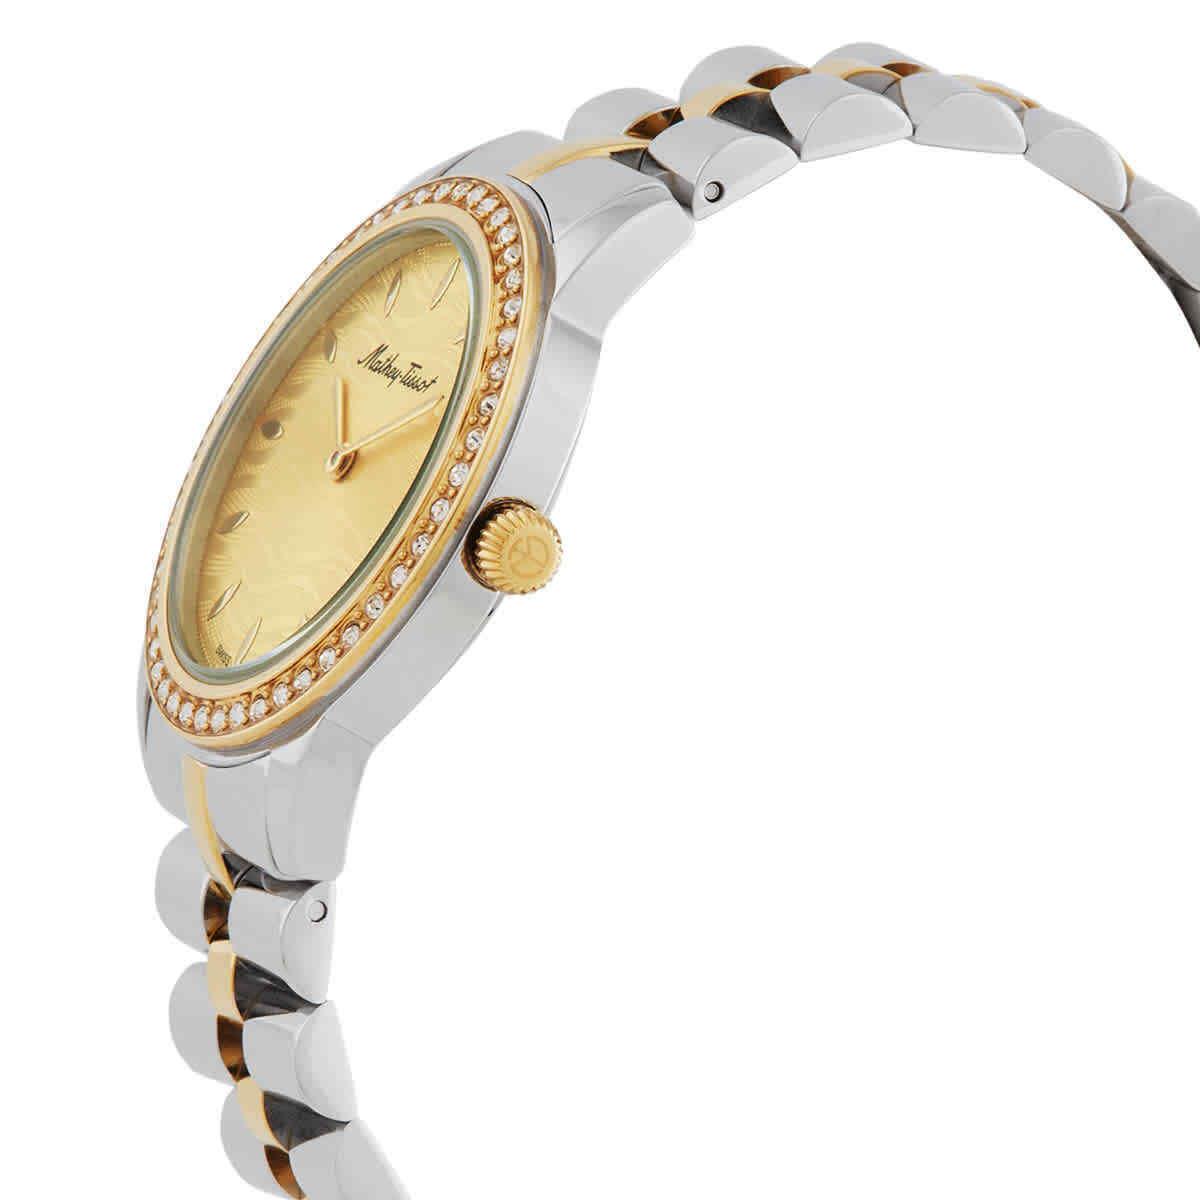 Mathey-tissot Artemis Quartz Crystal Champagne Dial Ladies Watch D10860BQDI - Dial: Champagne, Band: Two-tone (Silver-tone and Gold PVD), Bezel: Yellow Gold PVD